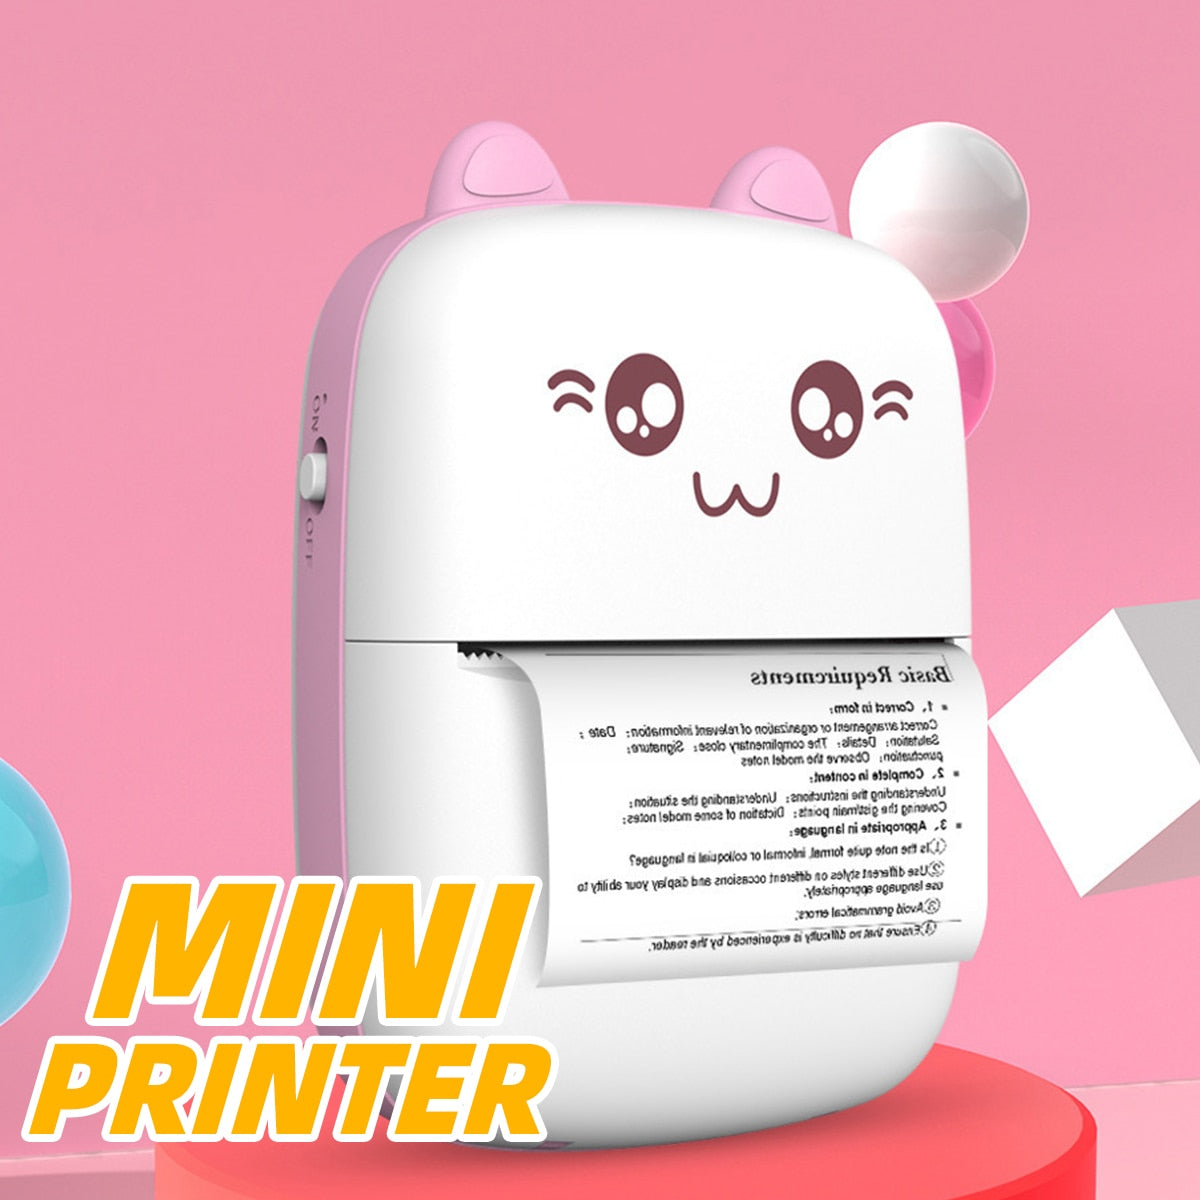 Mini Thermal Printer Smart Pocket Portable Photo Printer Usb Wrong Question Printing Wireless Bluetooth for Phone Android IOS